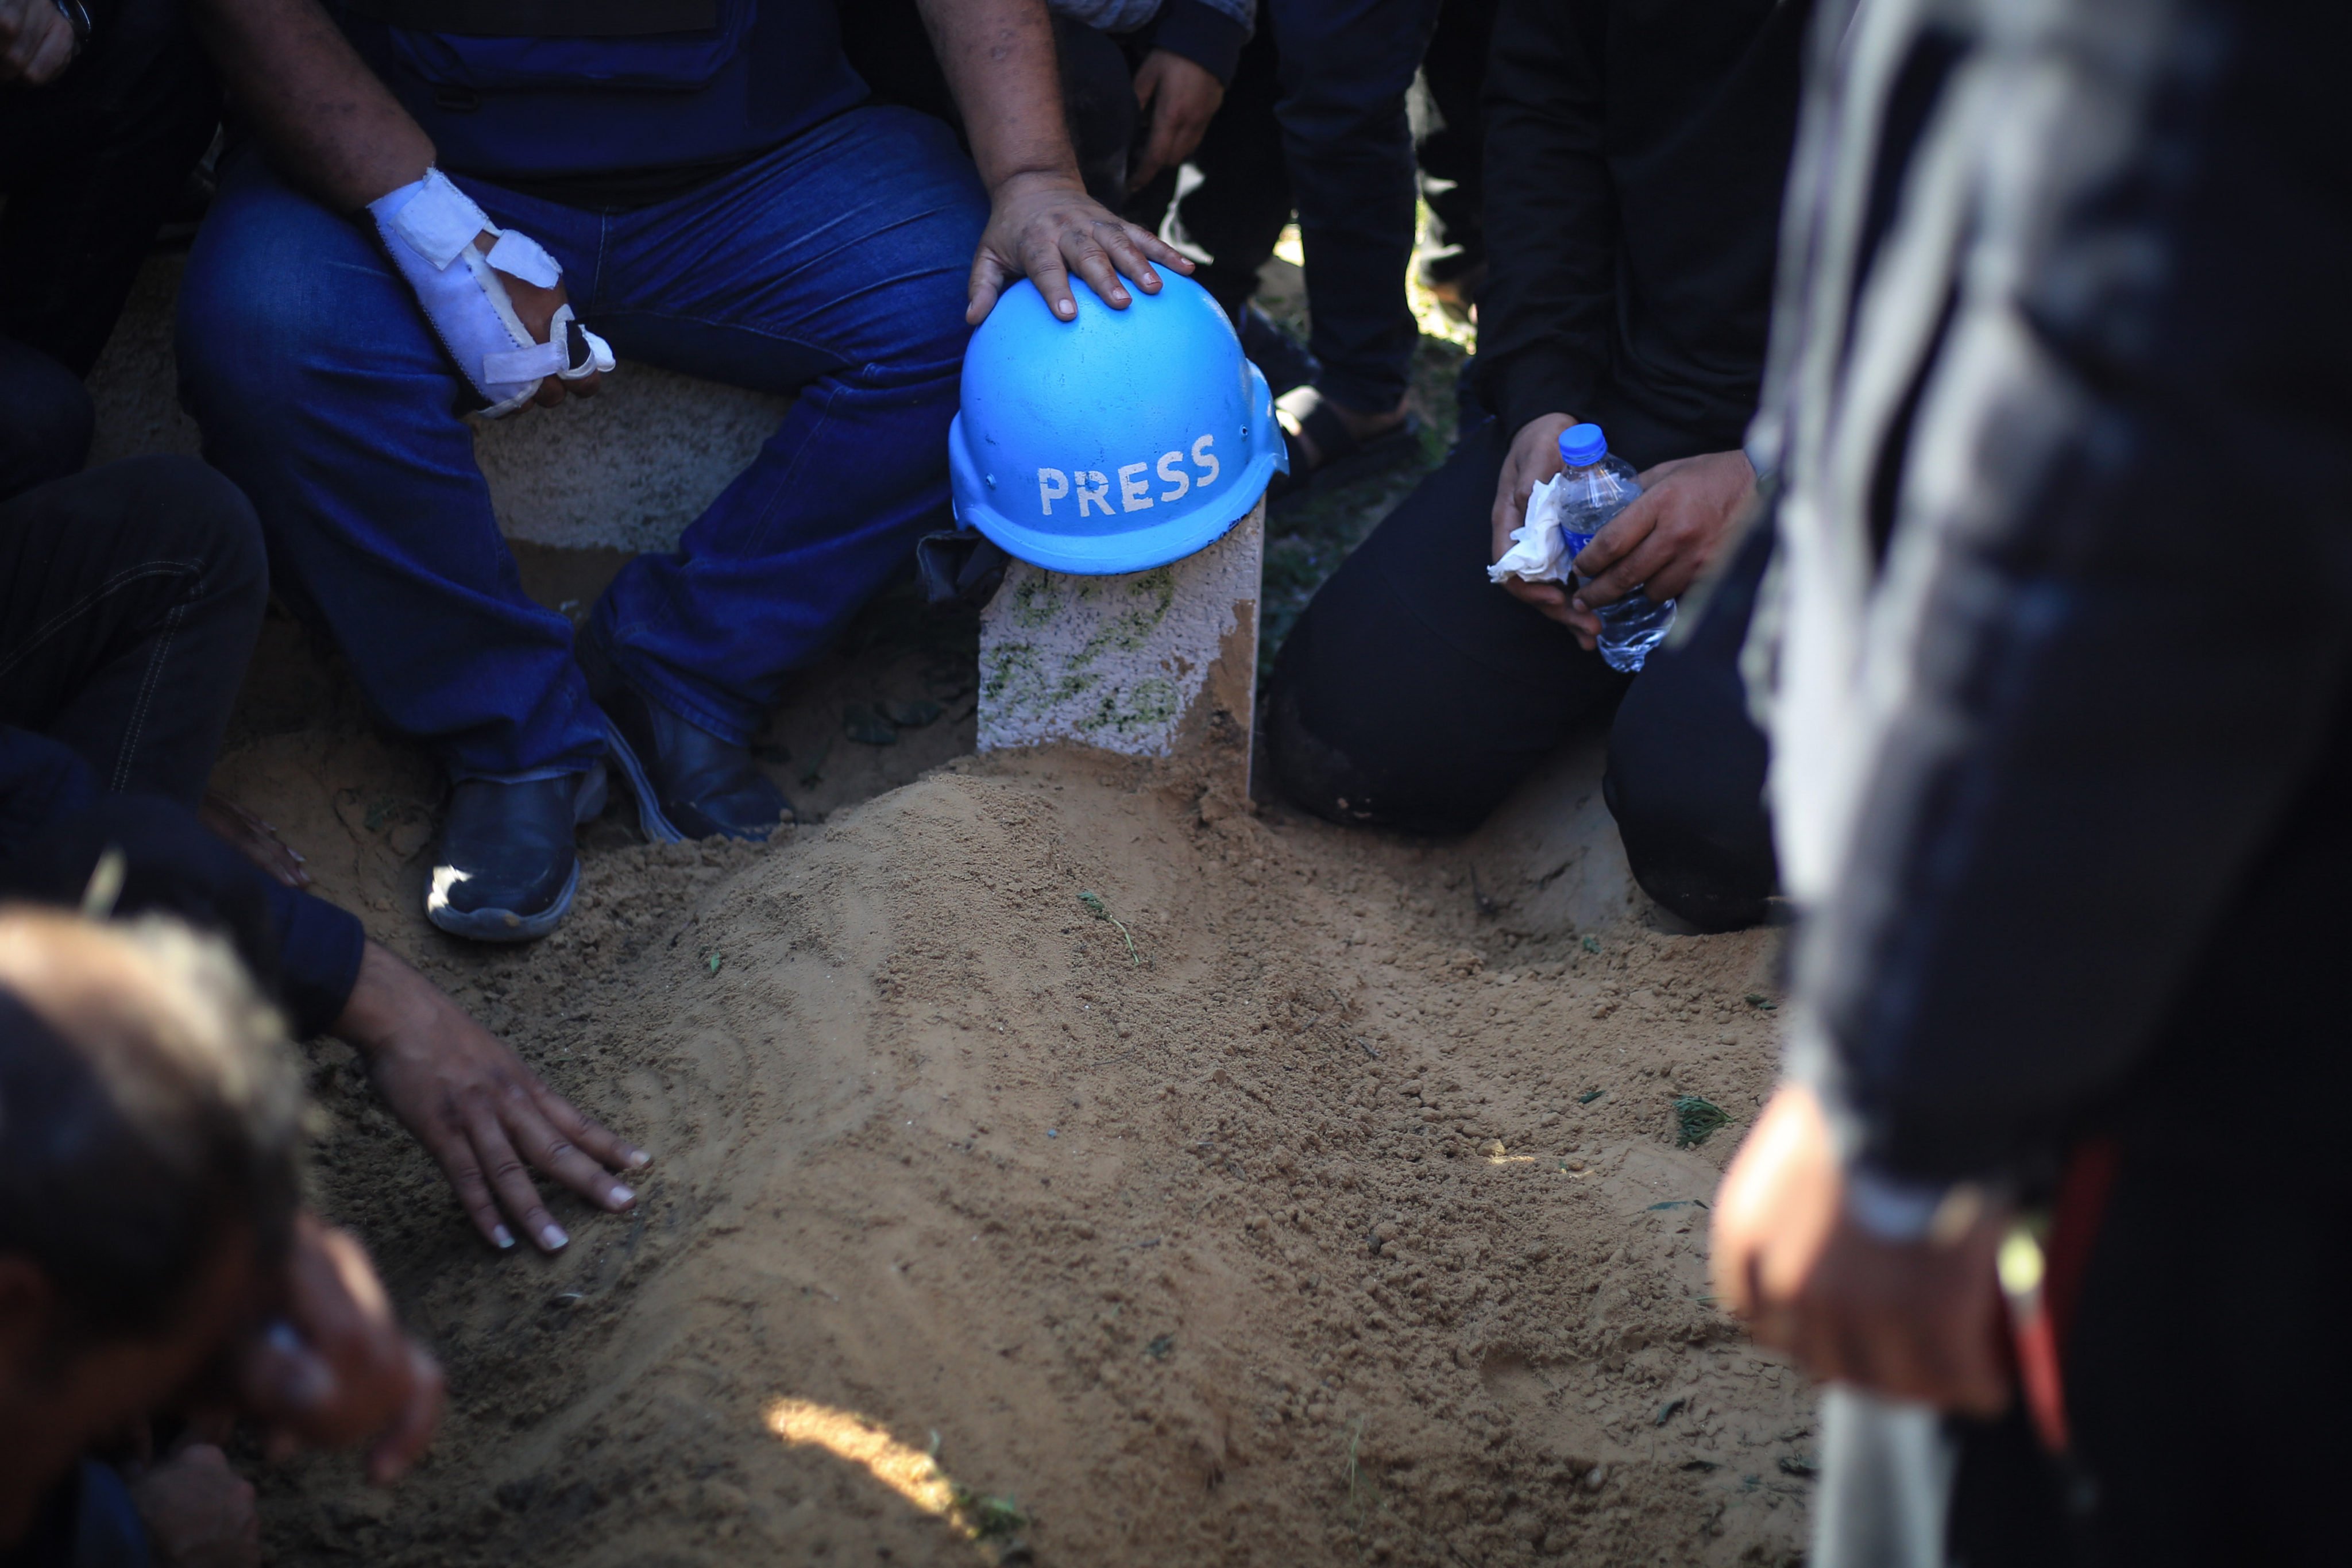 On January 7, a press helmet is placed on the grave of Hamza Dahdouh, a Palestinian journalist who worked for Al Jazeera and was killed in an Israeli air strike on Rafah. Photo: dpa